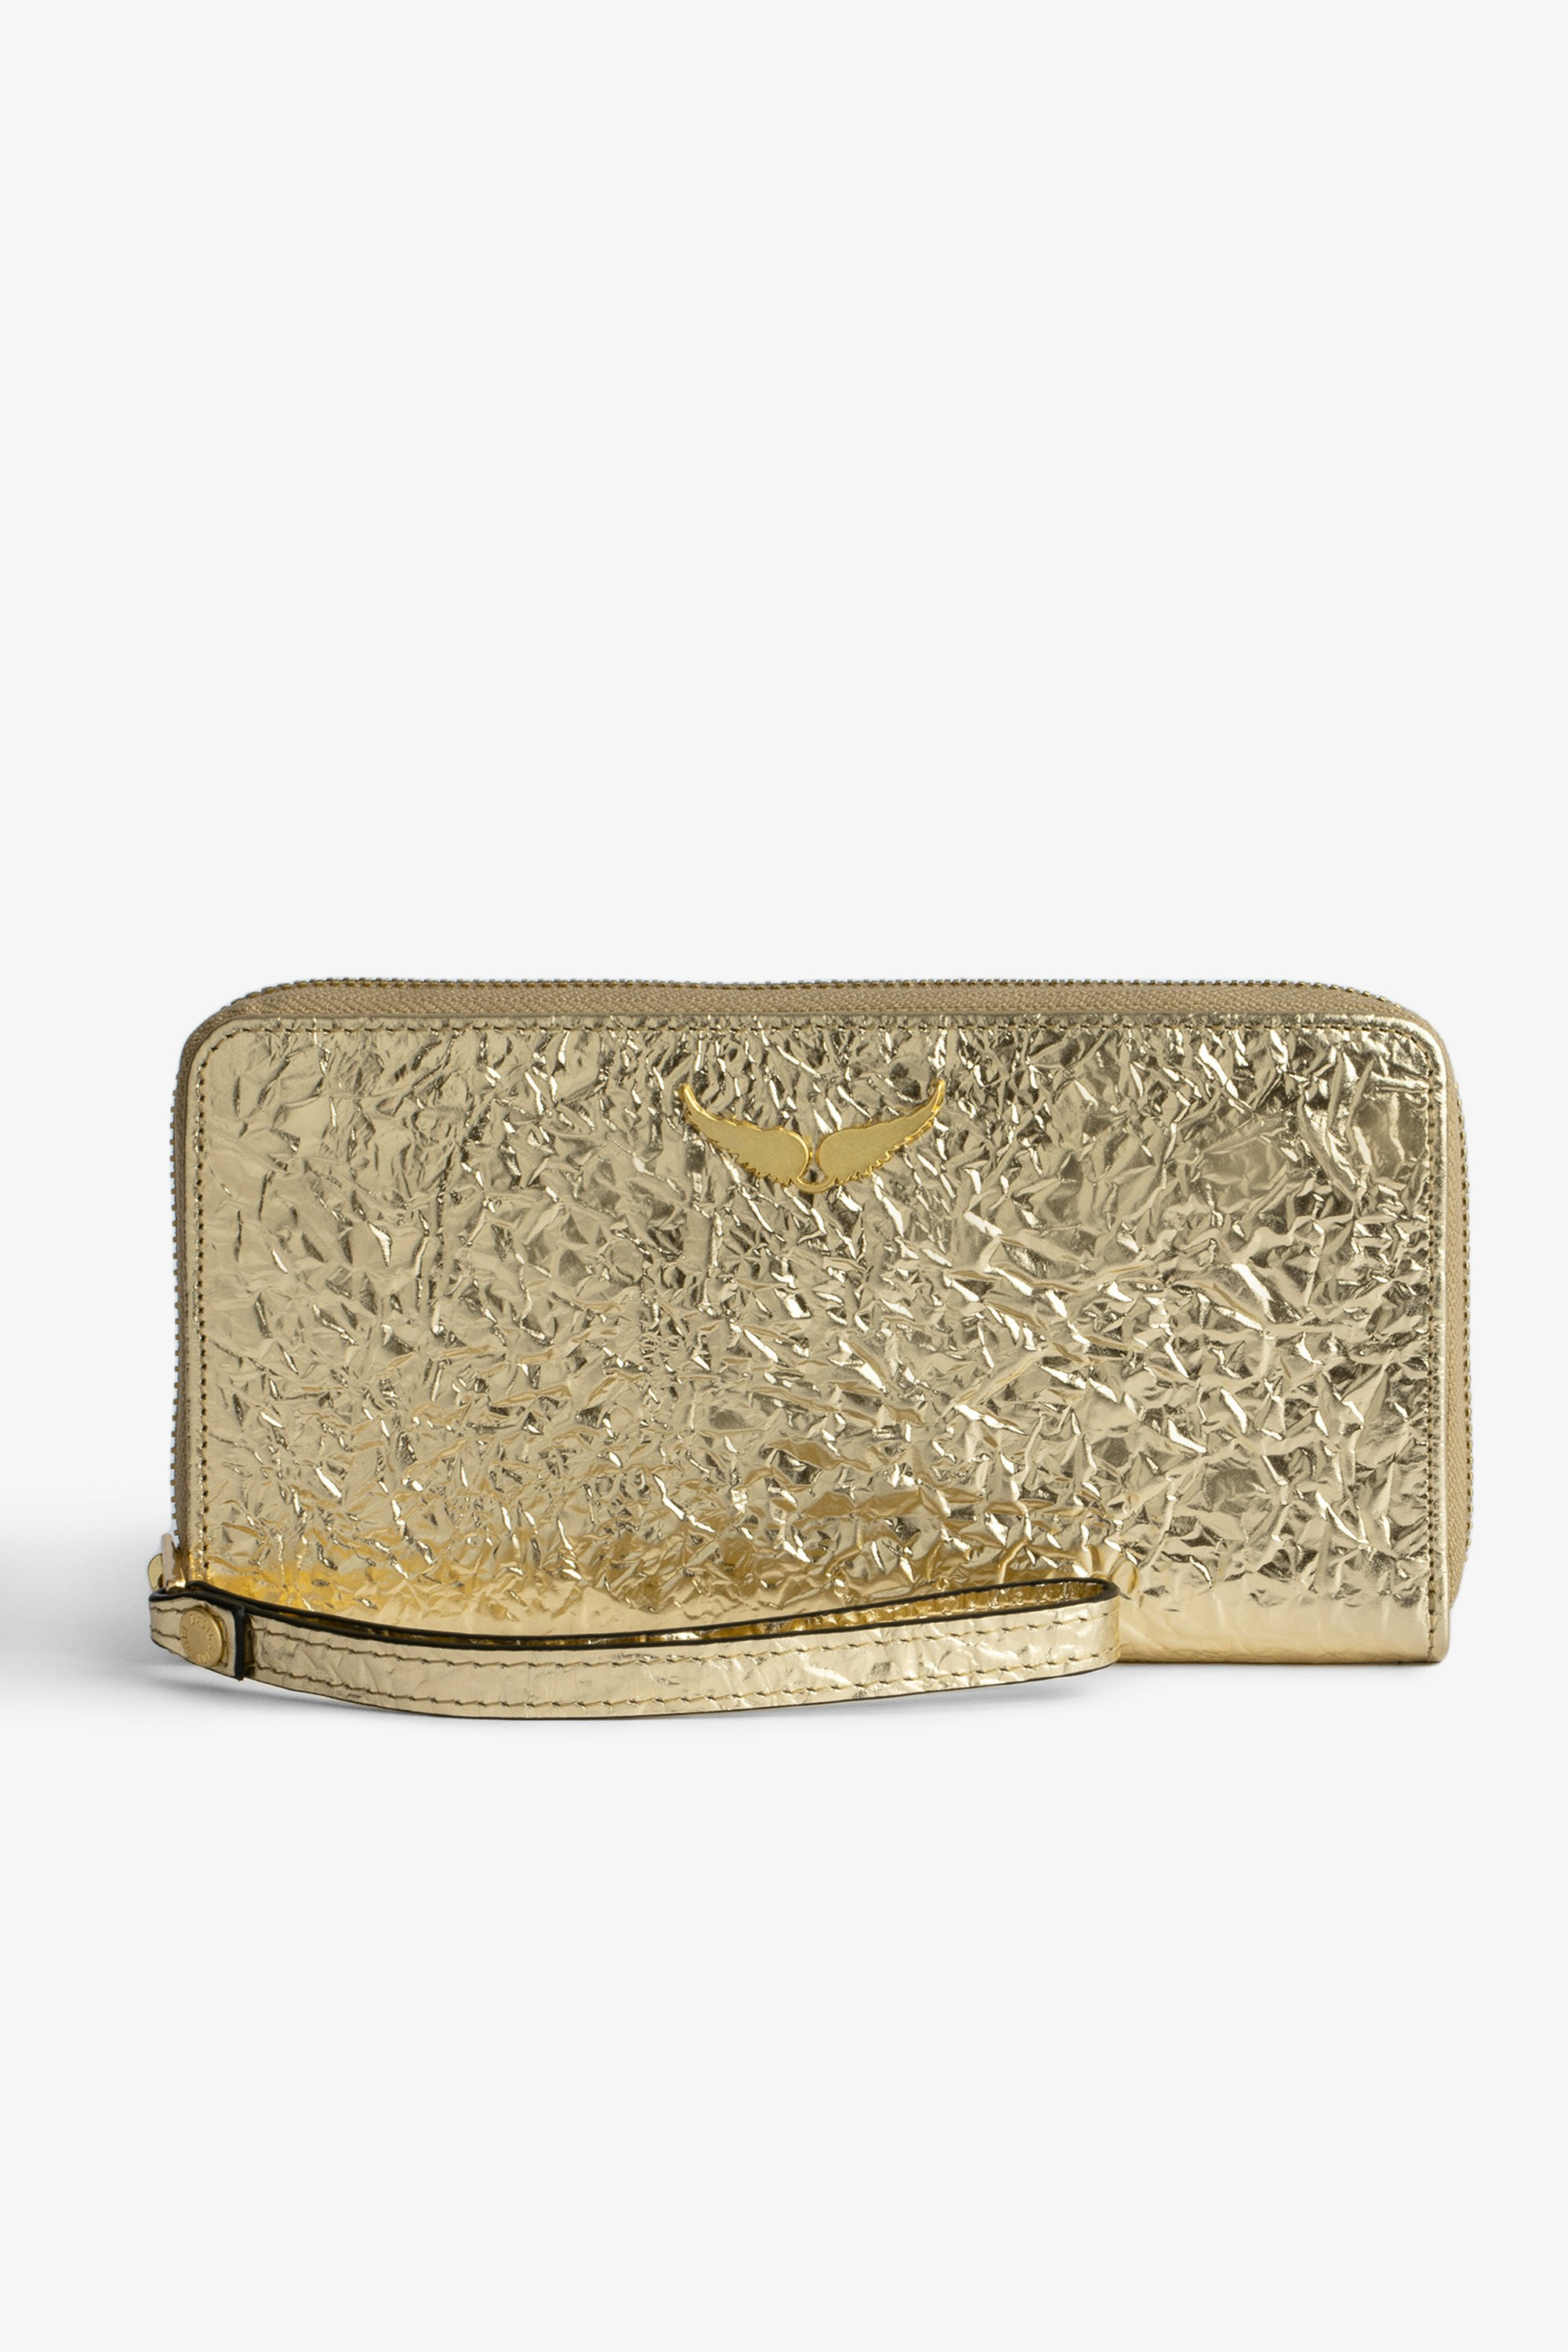 Compagnon 財布 Women’s metallic gold crinkled leather Compagnon wallet